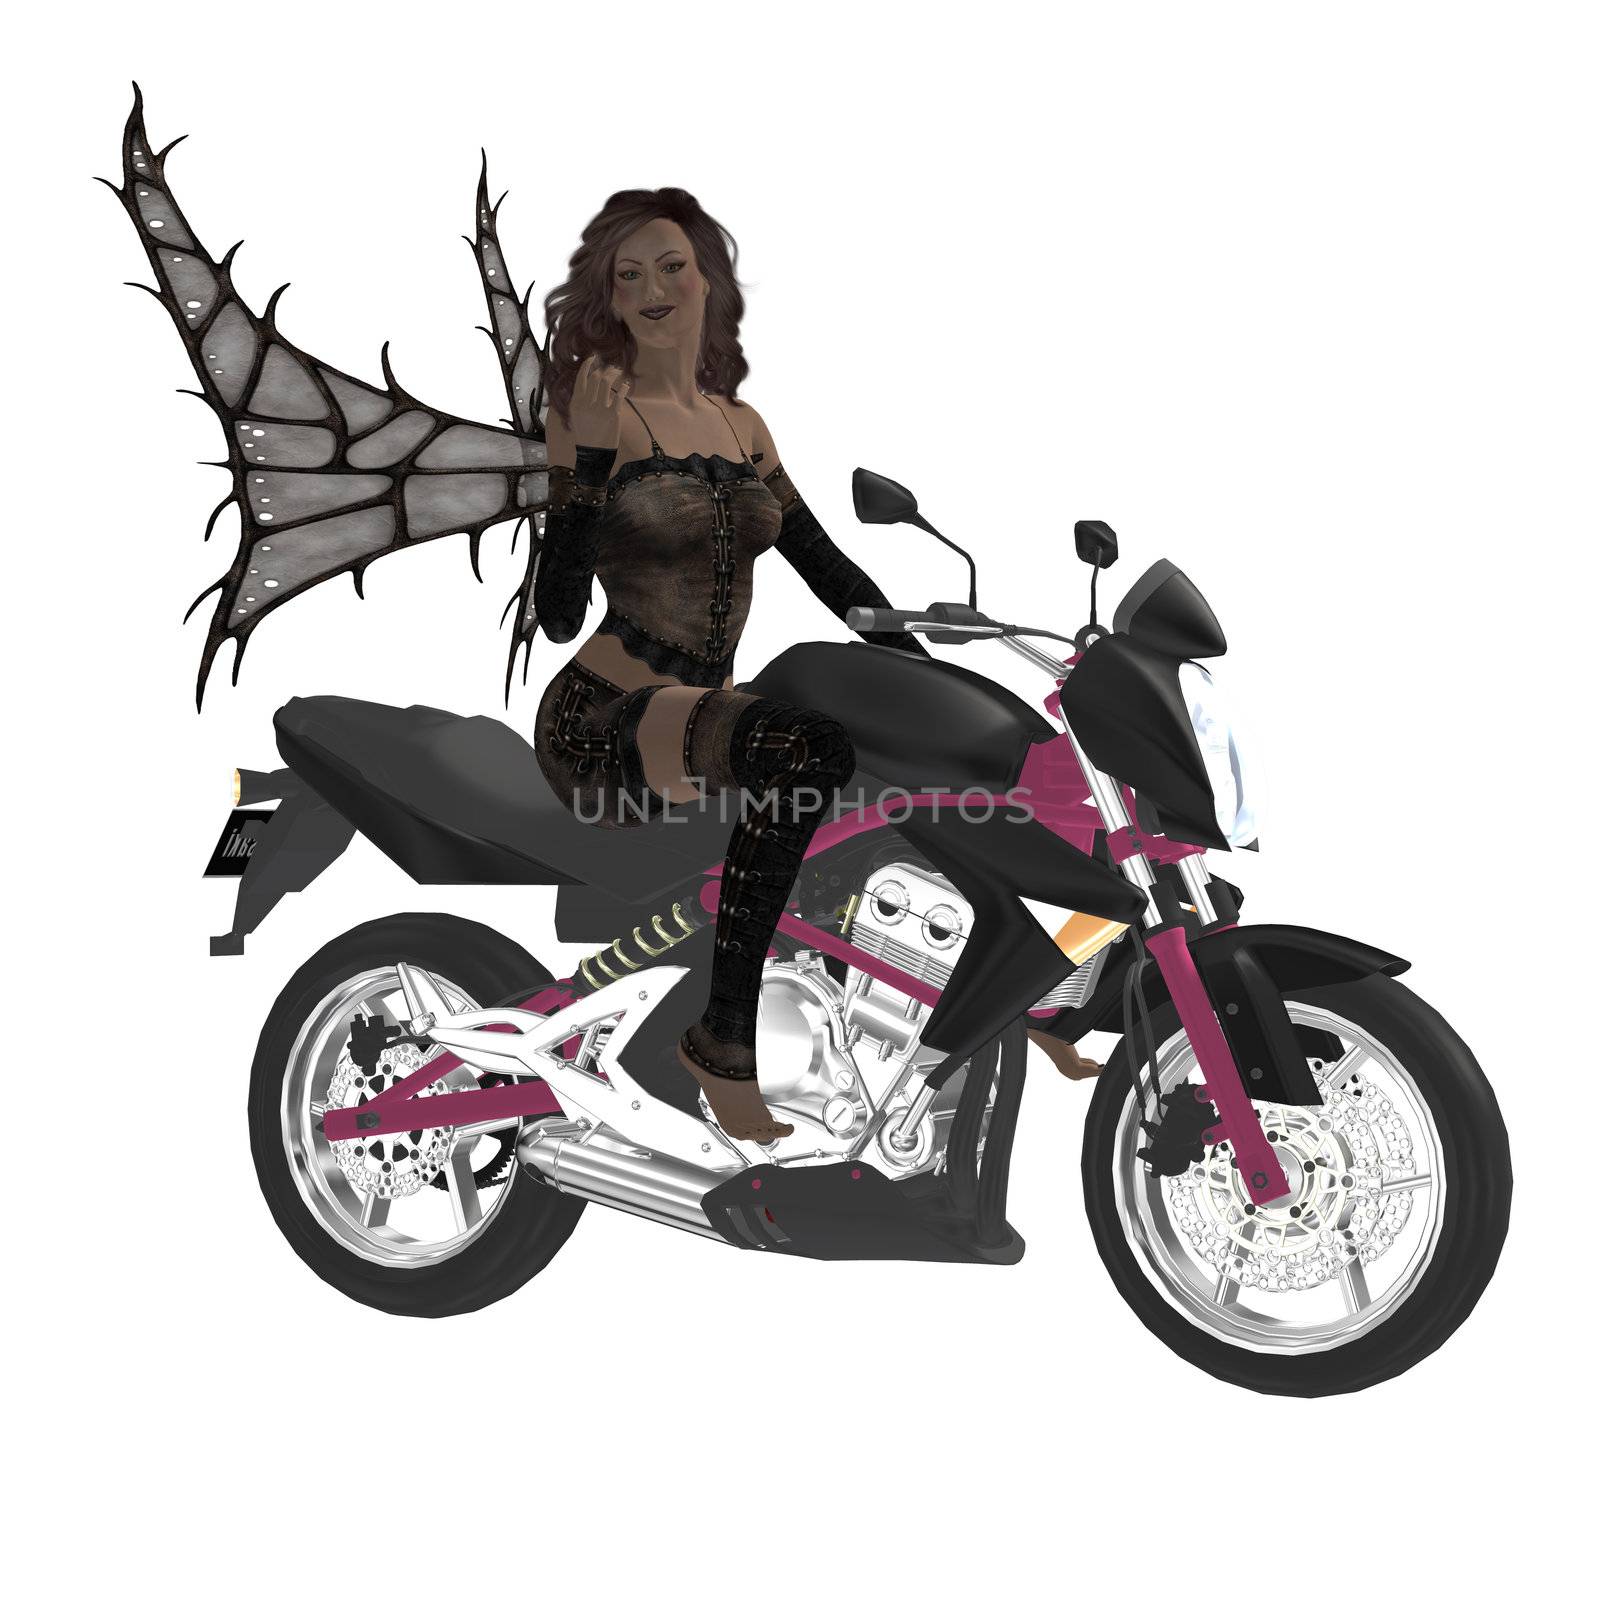 Fairy sitting on top of a motorcycle